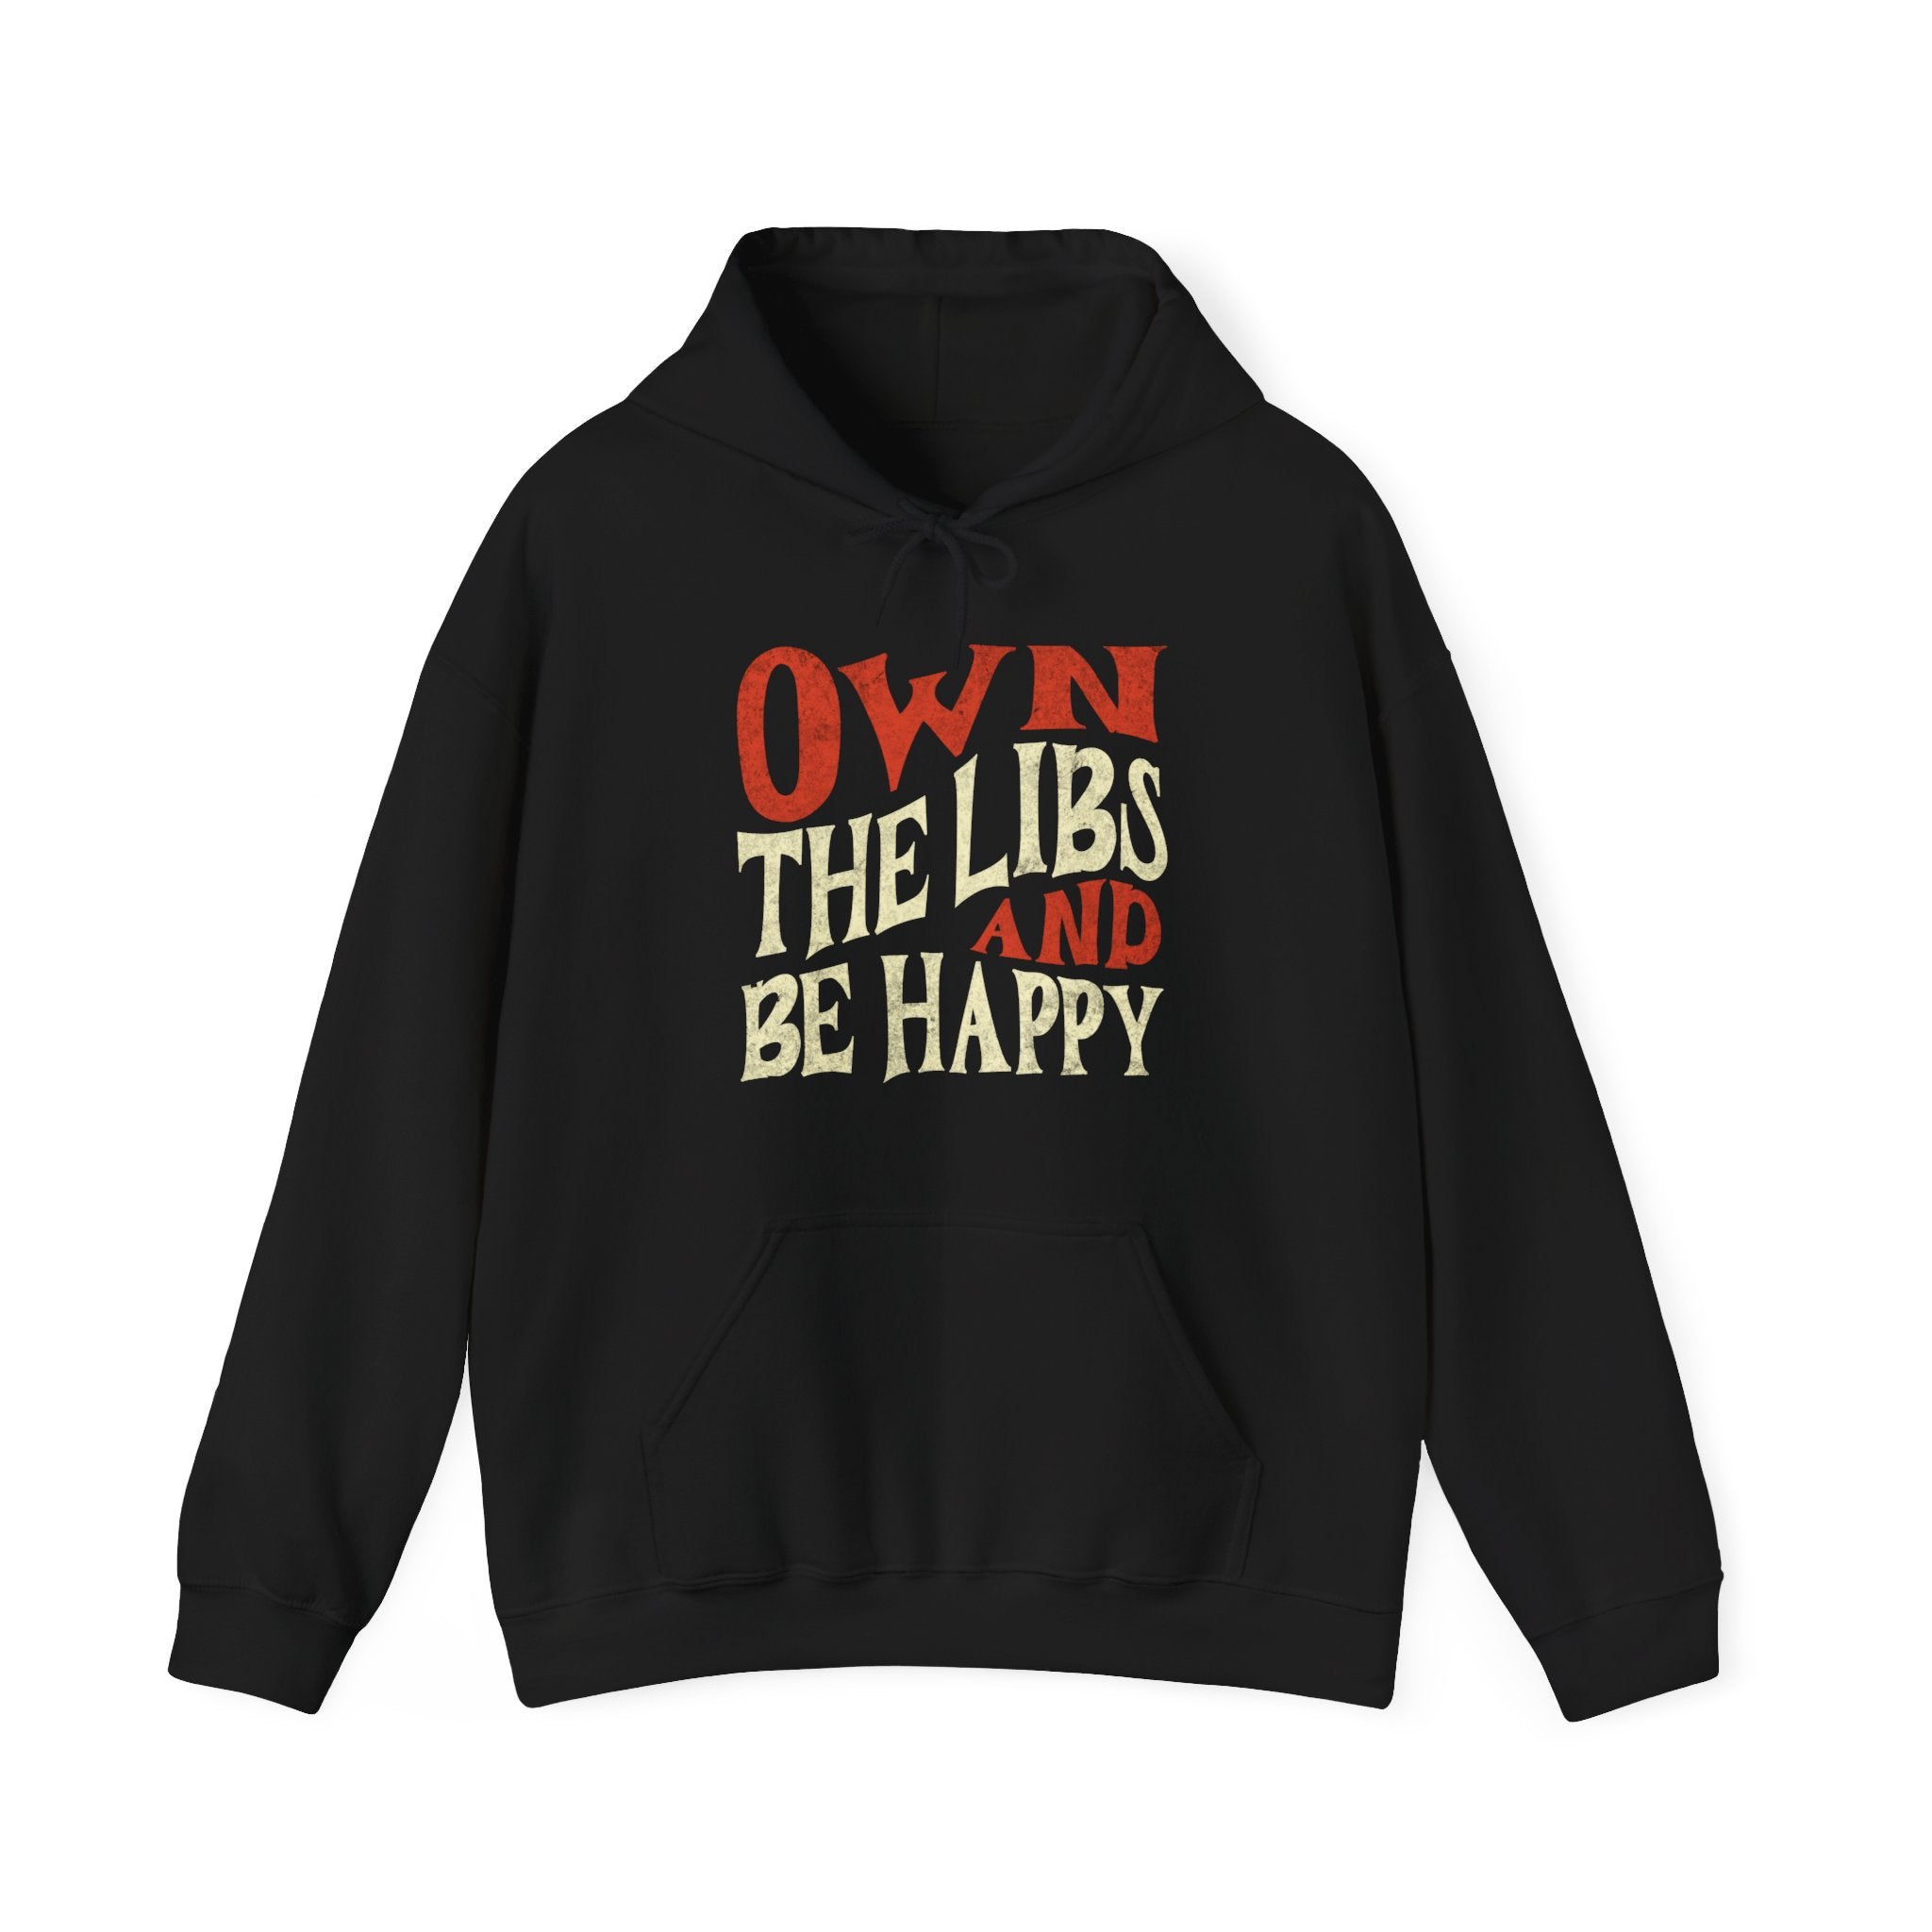 Own The Libs And Be Happy Hoodie